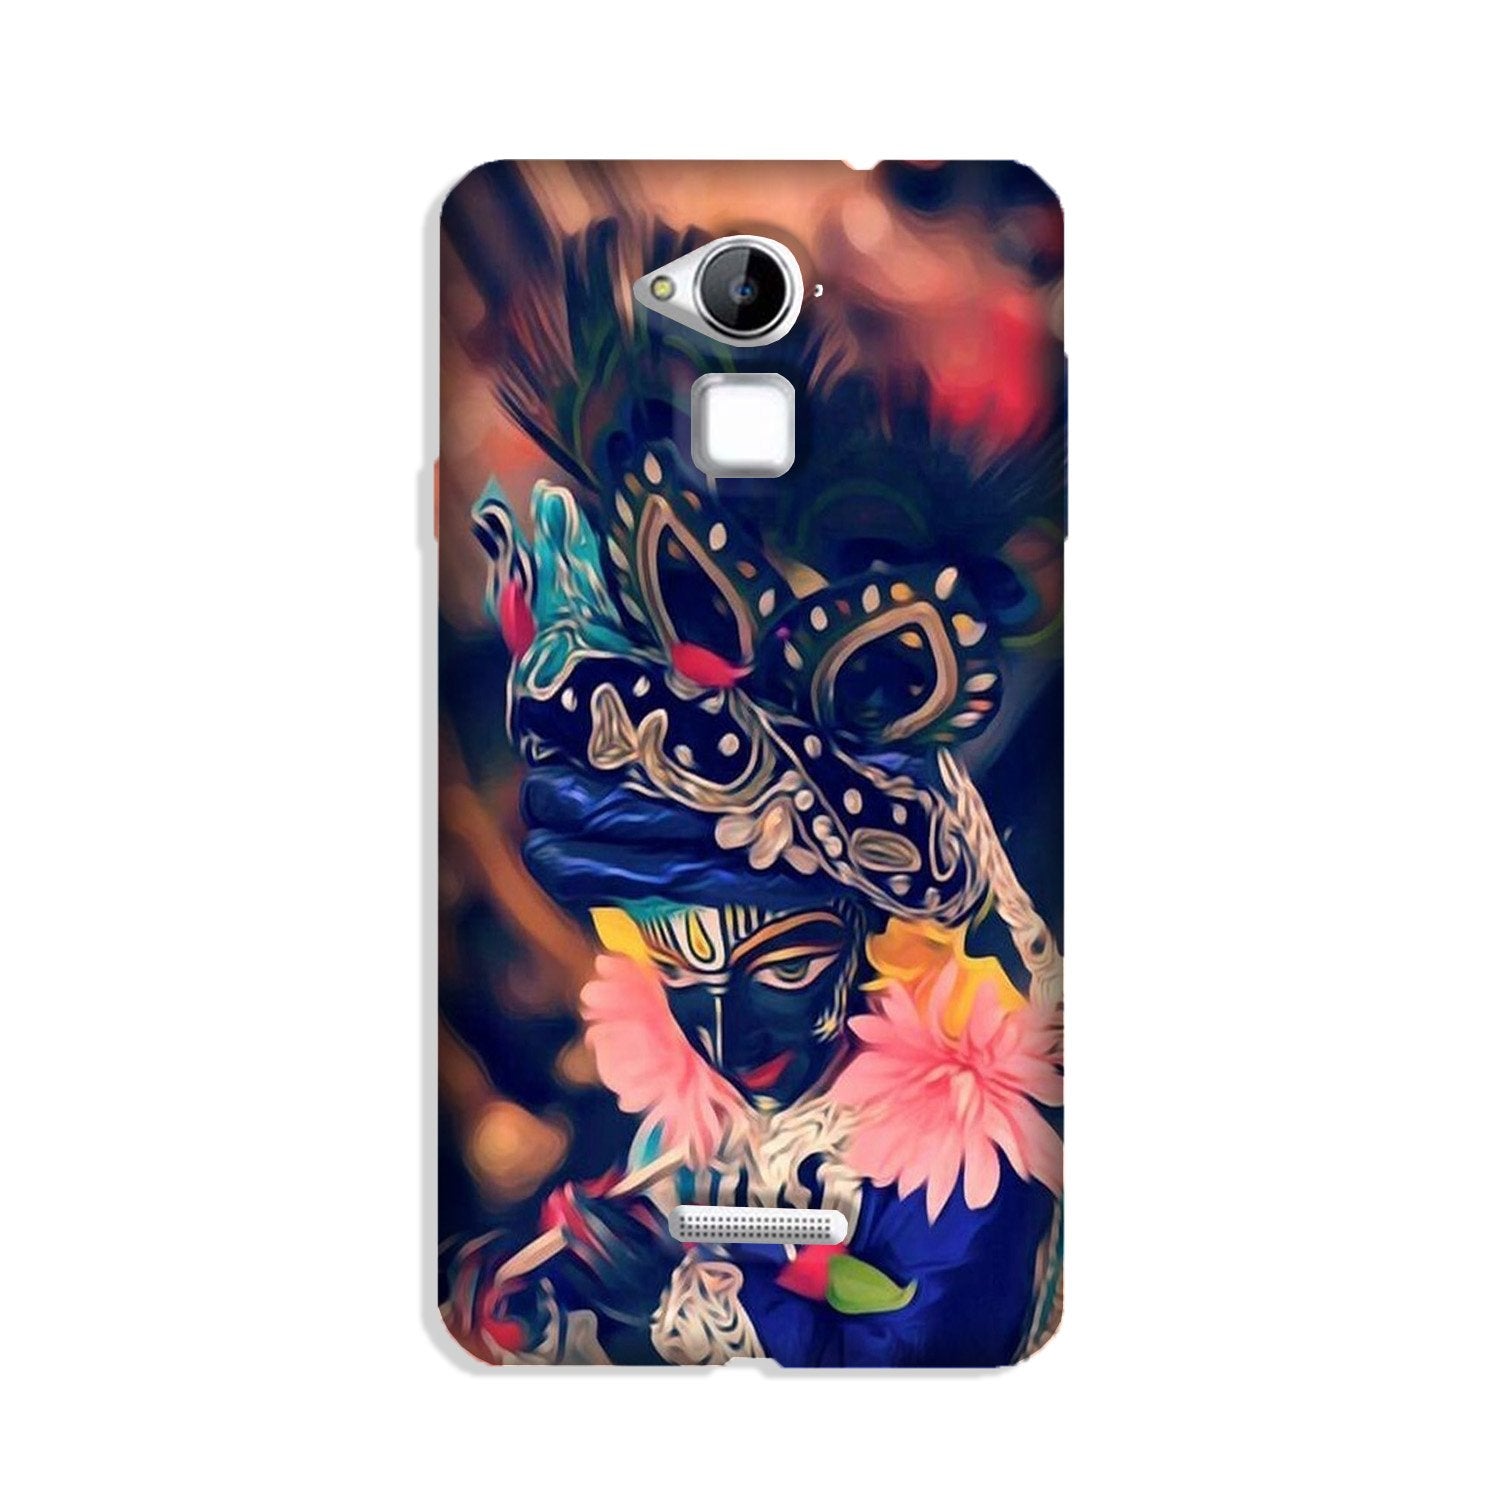 Lord Krishna Case for Coolpad Note 3